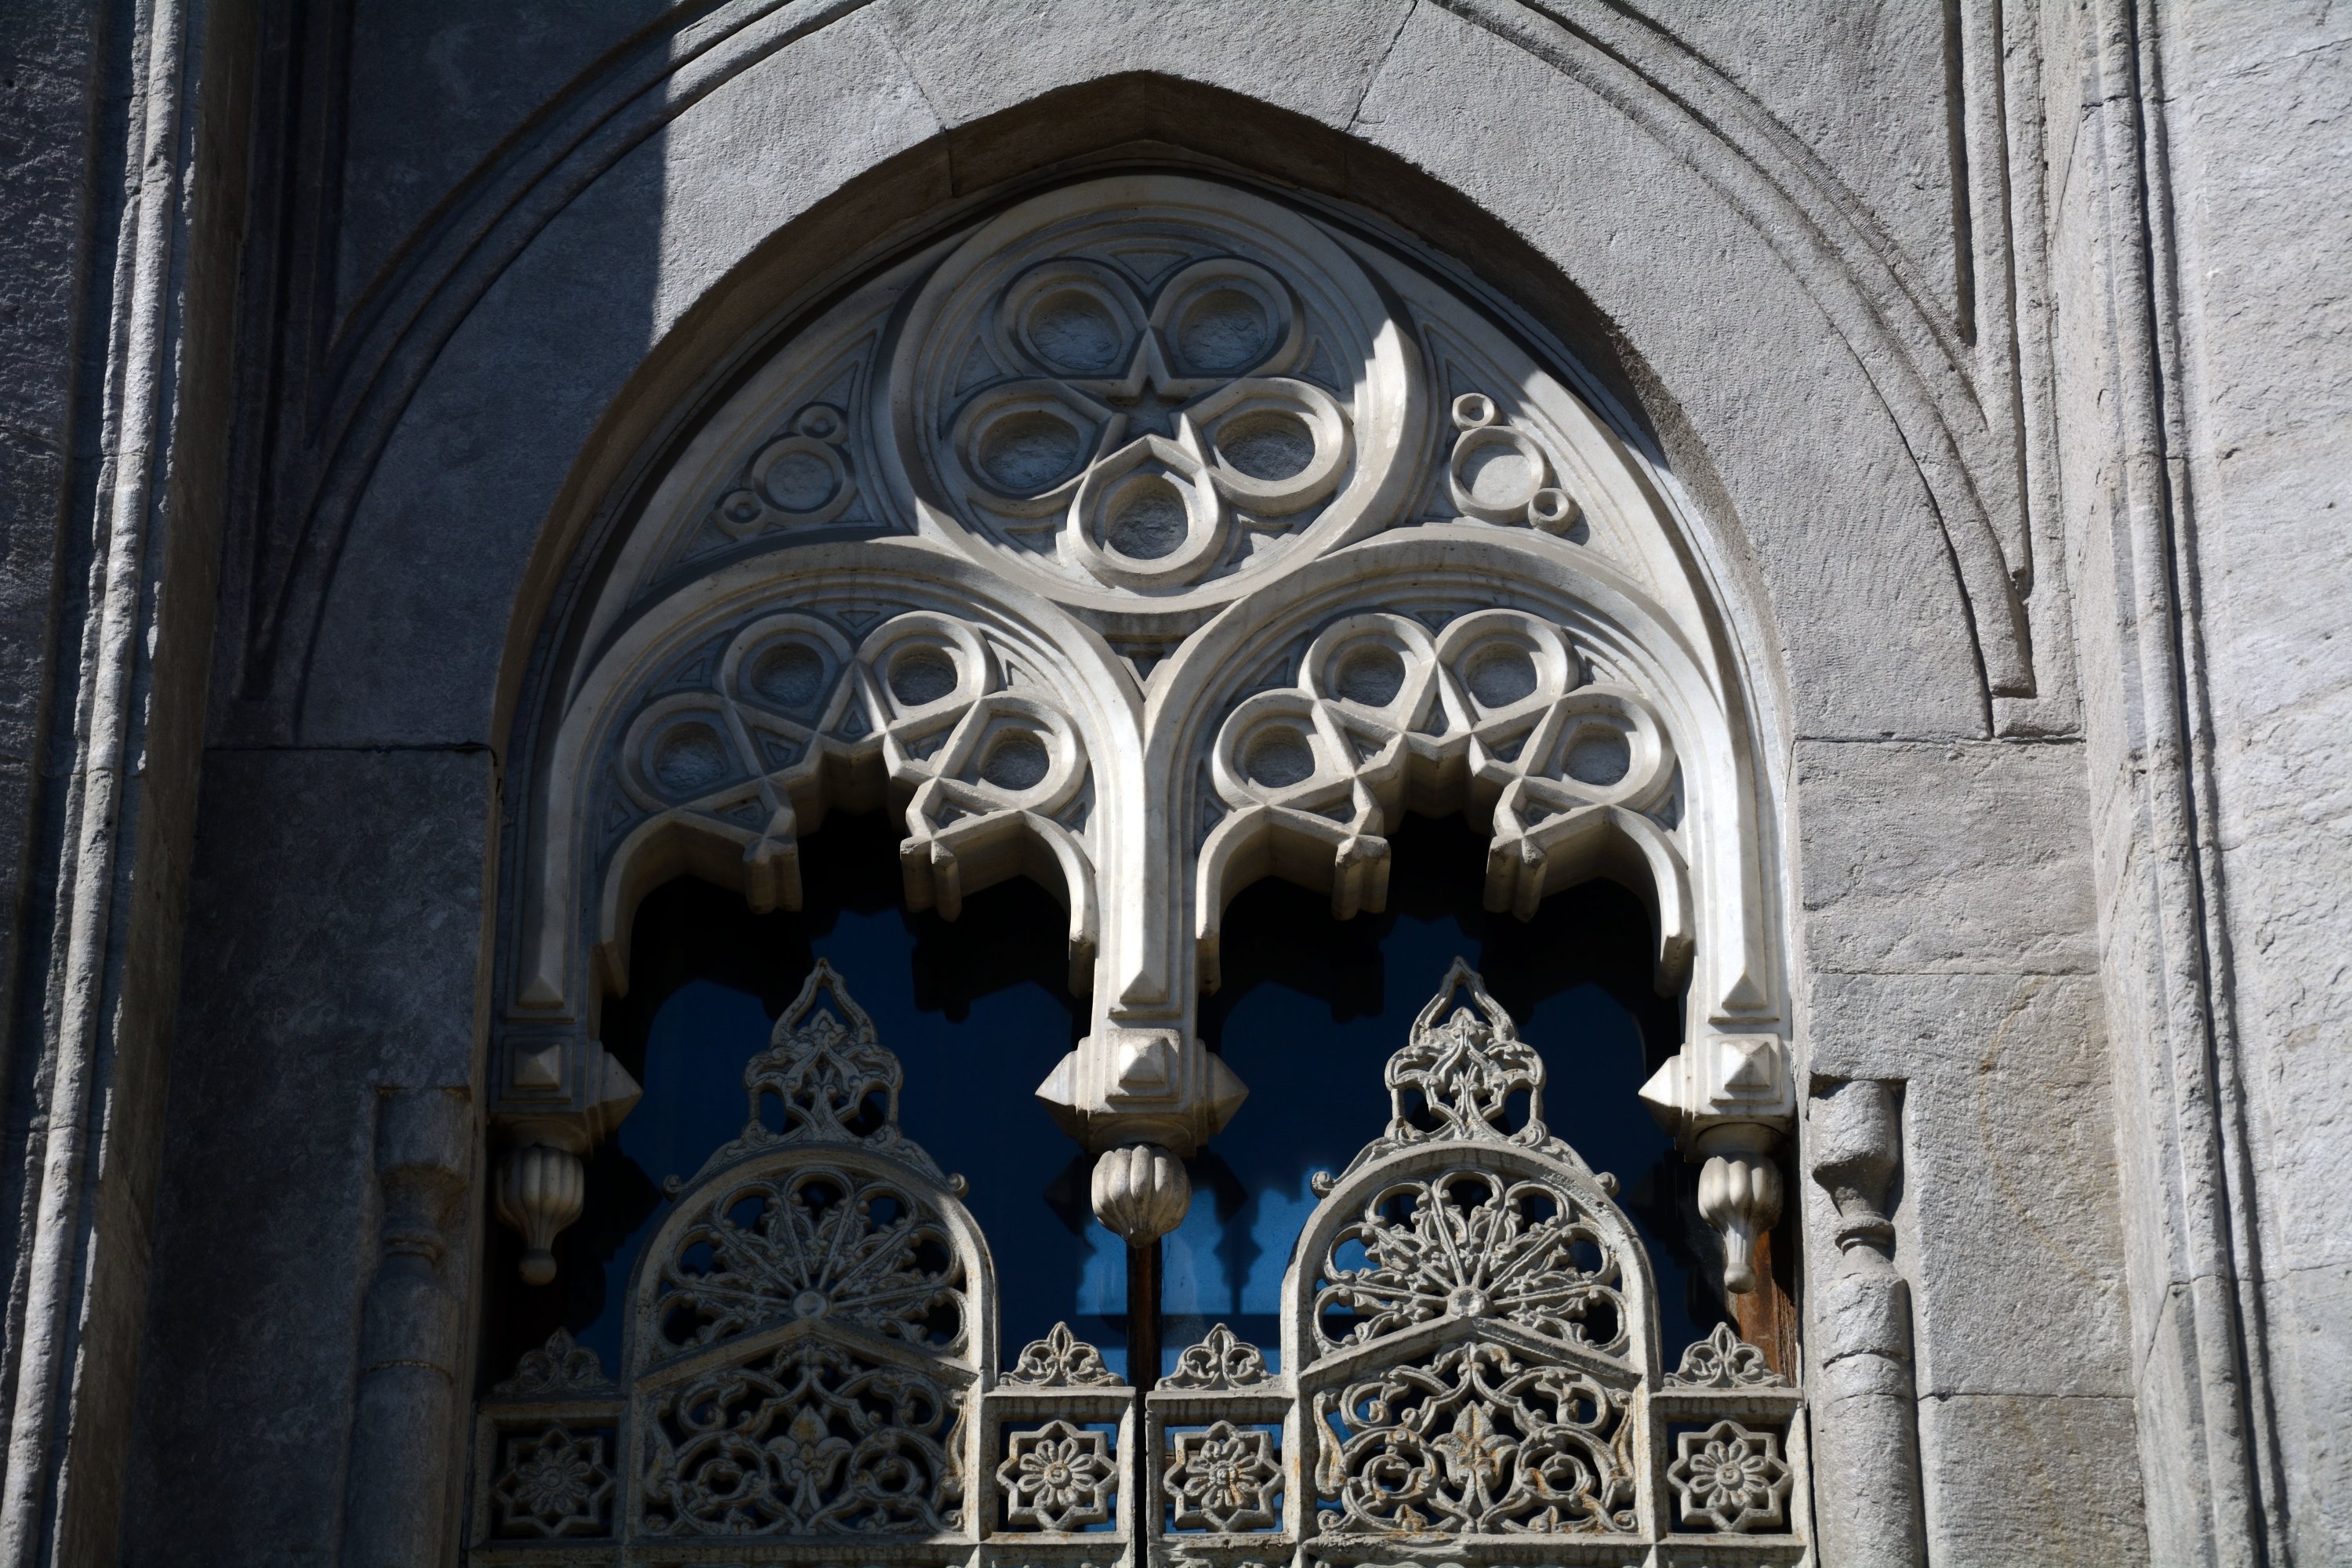 Close-up of architectural details of the Pertevniyal Valide Sultan Mosque, Aksaray, Istanbul, March 17, 2019. (Shutterstock) 